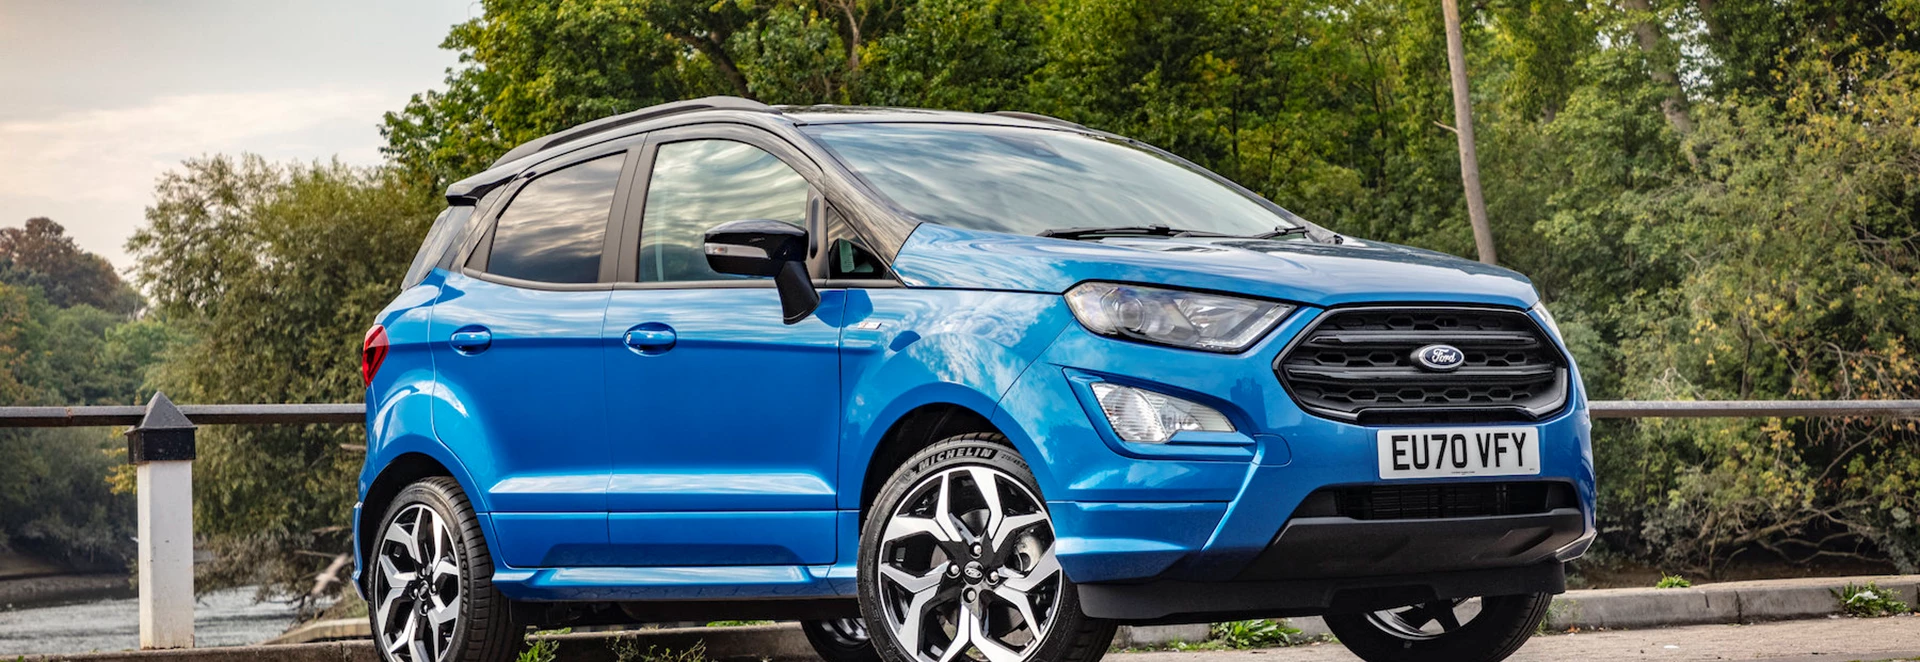 Ford Ecosport: Why this baby SUV should be on your crossover shortlist 